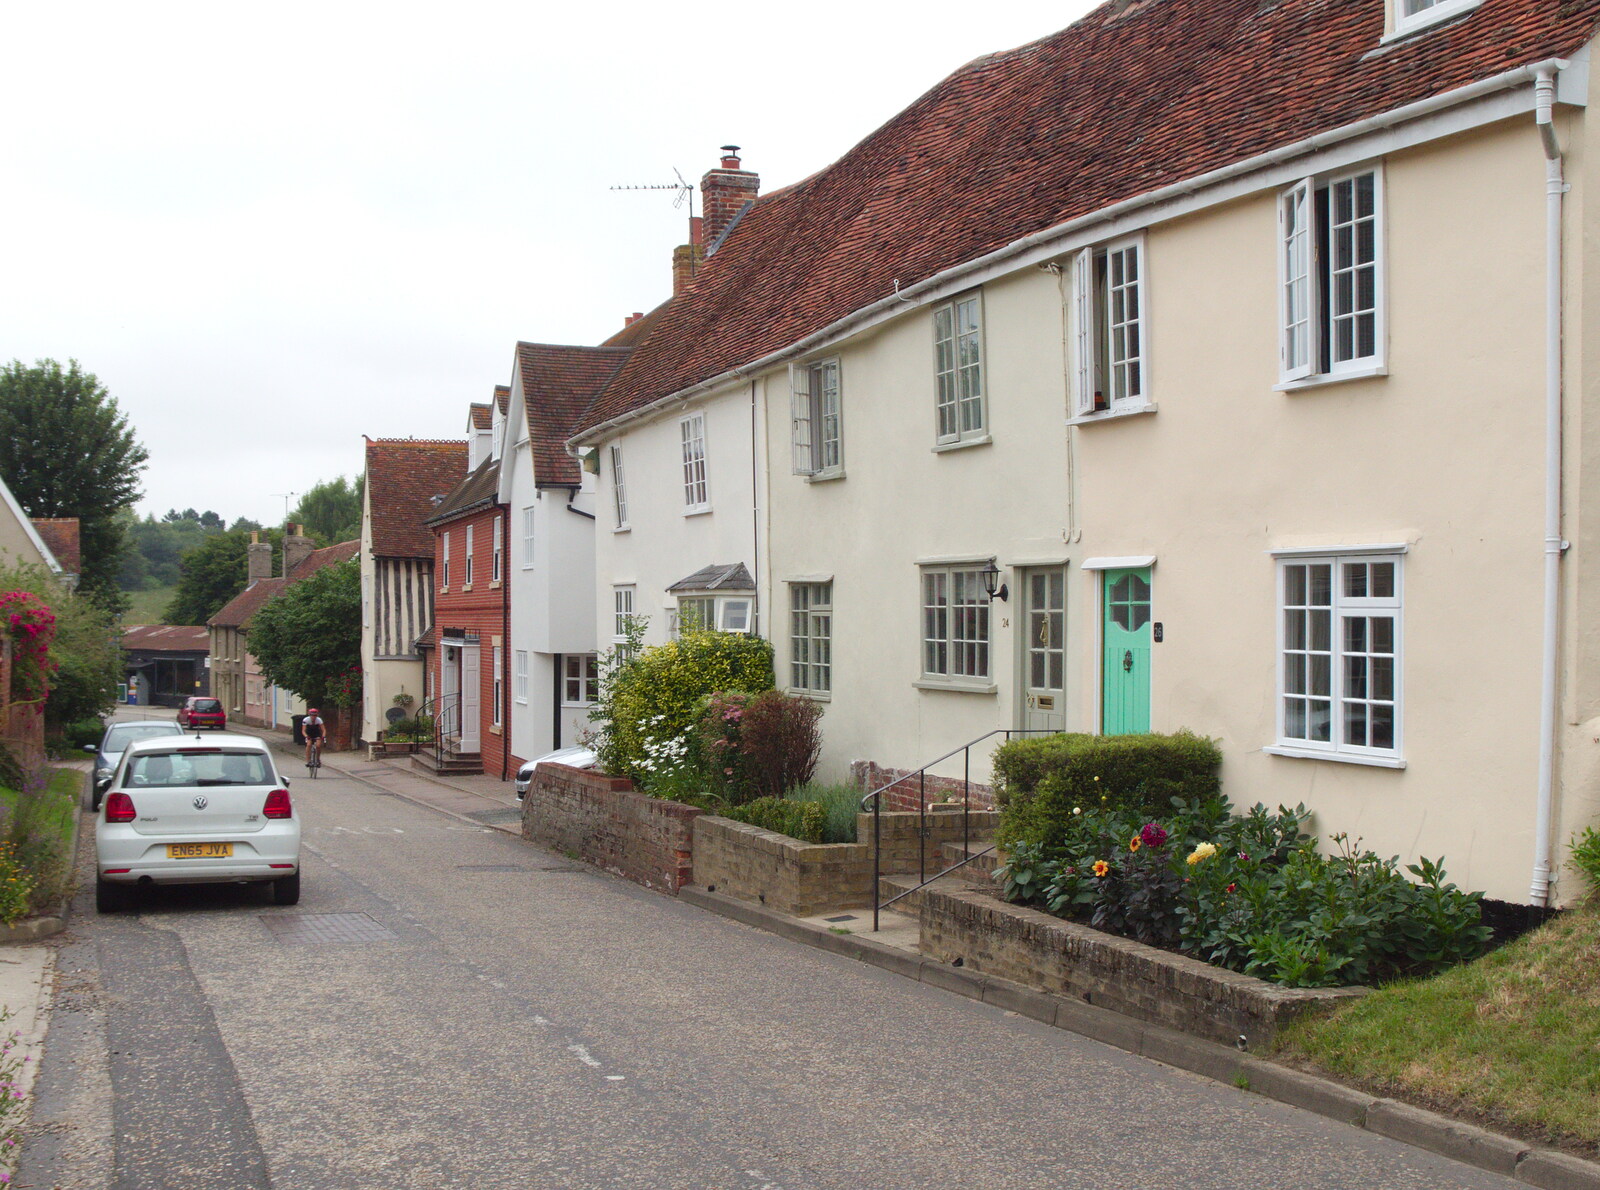 Another quaint street in Boxford from A Postcard from Boxford and BSCC at Pulham, Suffolk and Norfolk - 13th July 2019